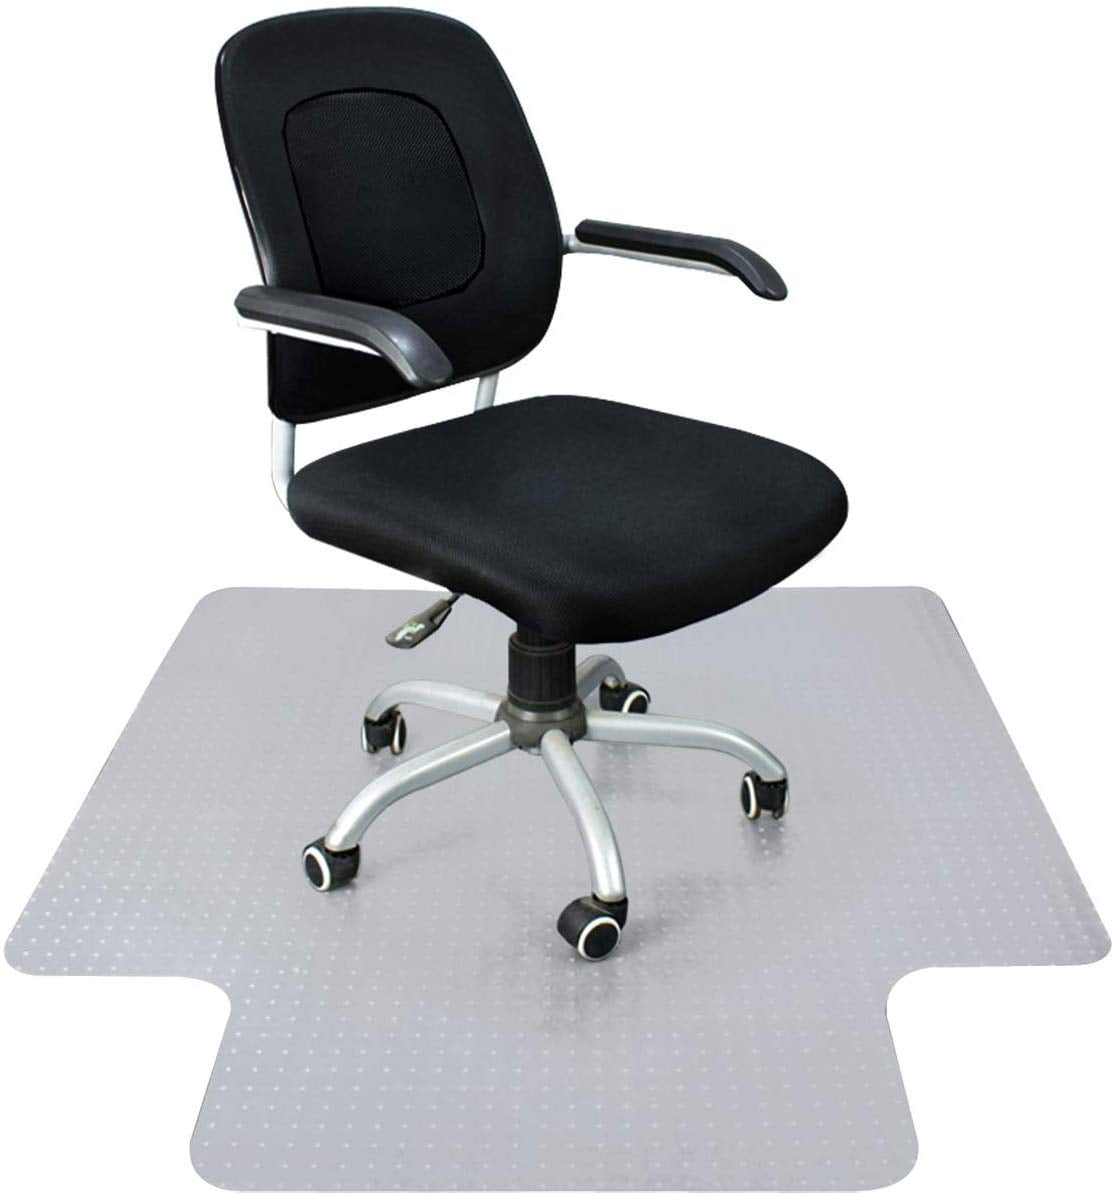 3MM Thickness Plastic Floor Office Chair Mat 48 X 36 Clear Protector Office Chair Rug Carpet Floor Computer Desk 1200mmx 900mm F2C 48-Inch by 36-Inch 1/8 